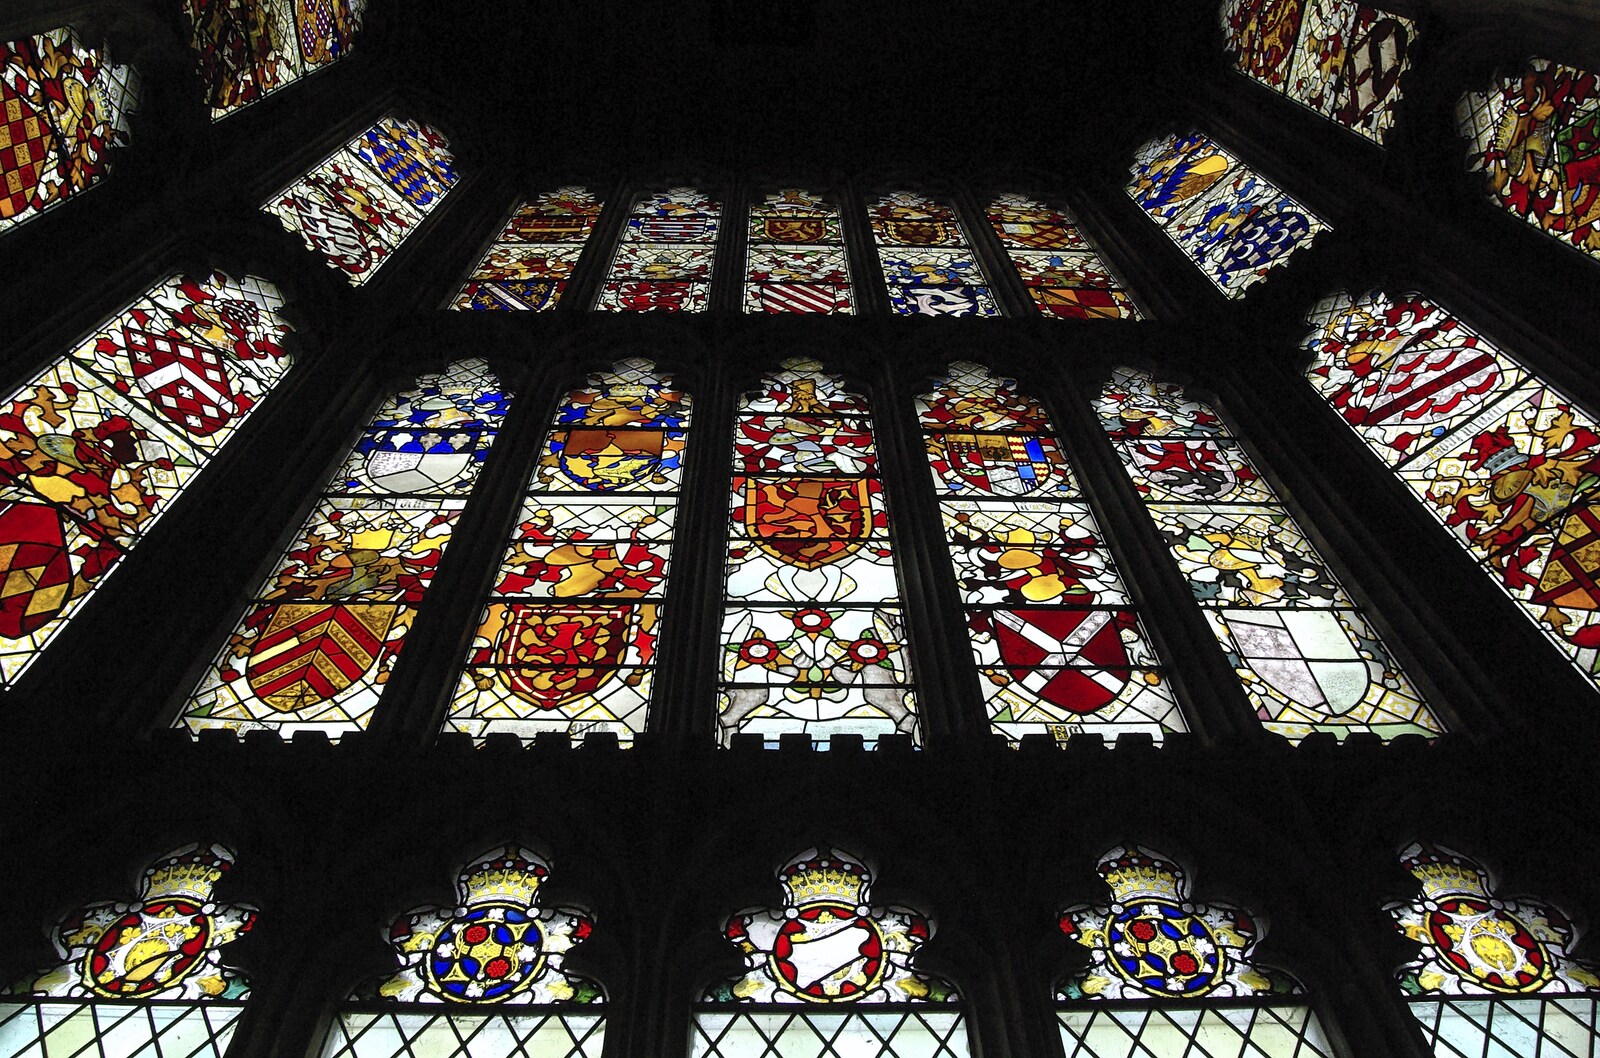 Qualcomm at Alton Towers, Staffordshire - 29th June 2008: Stained glass in the great hall